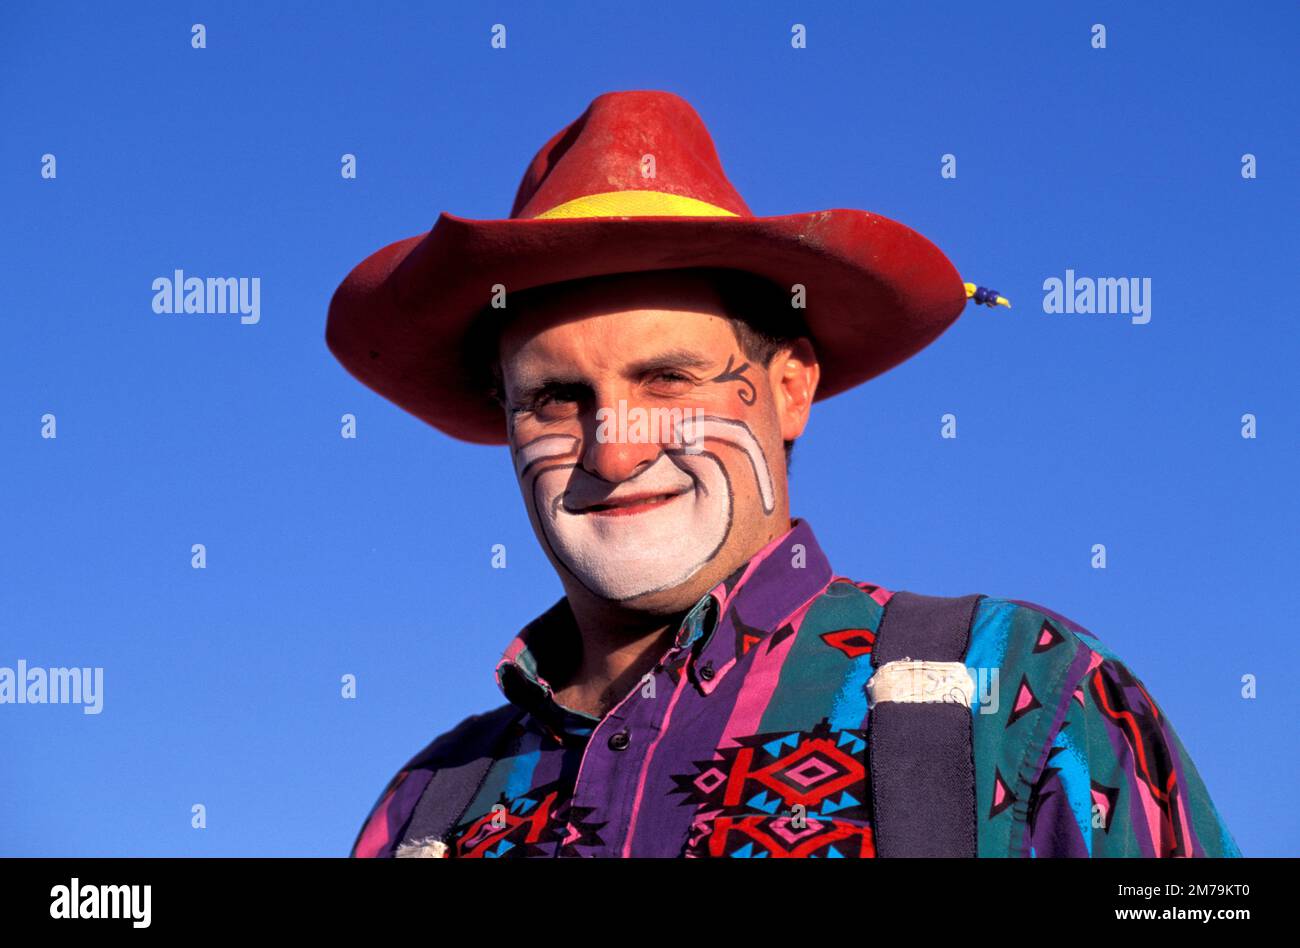 easy rodeo clown faces - Google Search